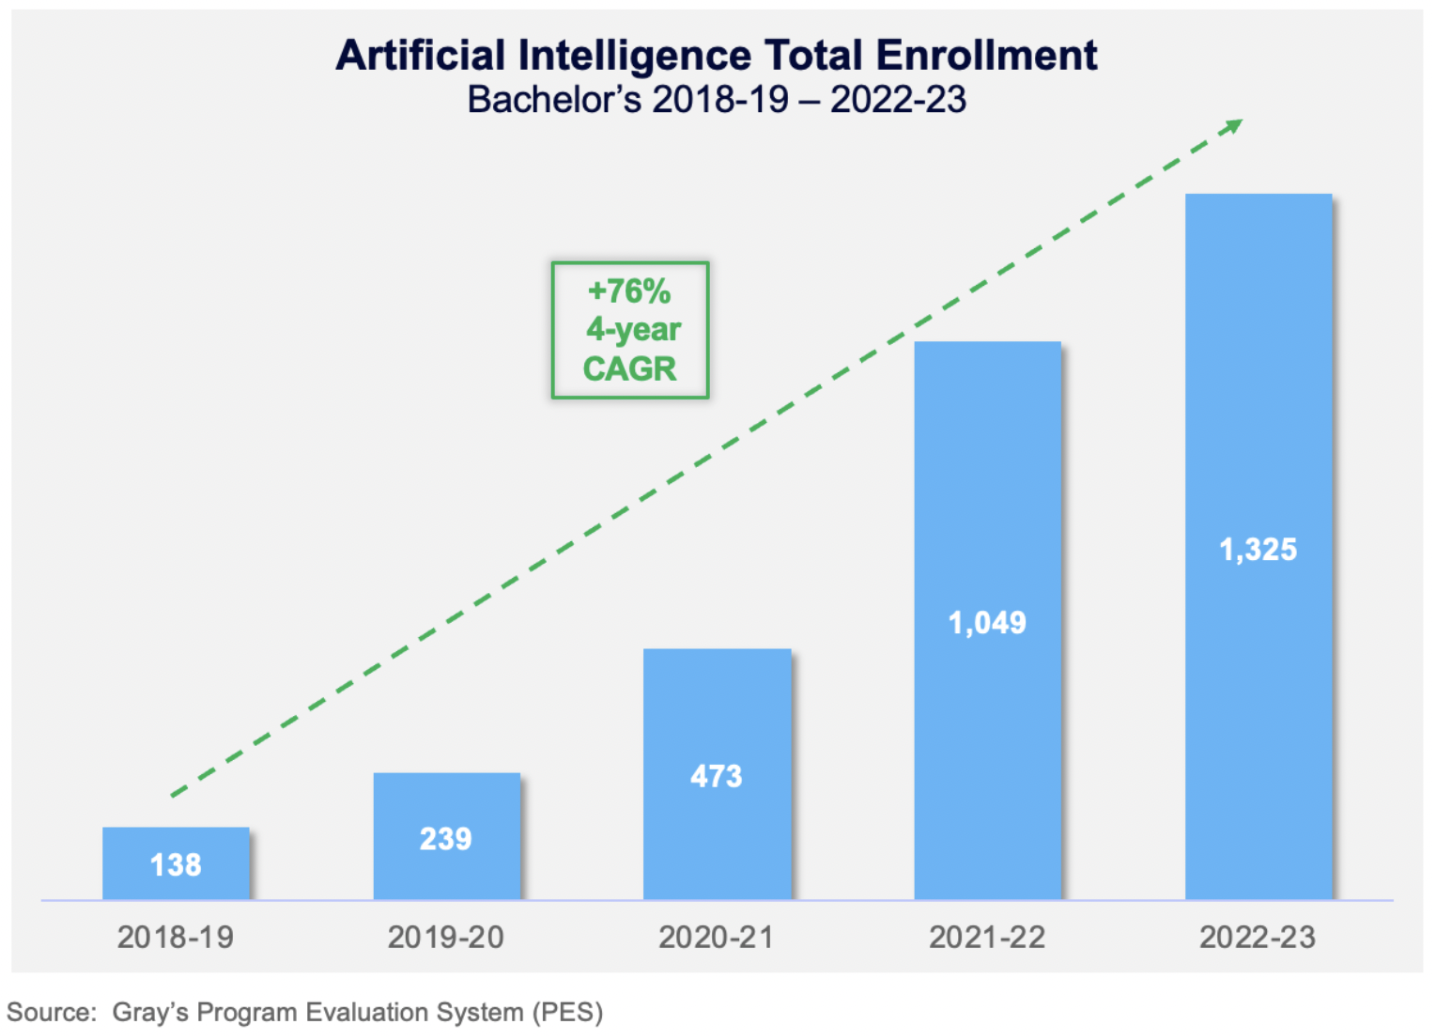 Artificial Intelligence Total Enrollment (Bachelor's 2018-19 to 2022-23)